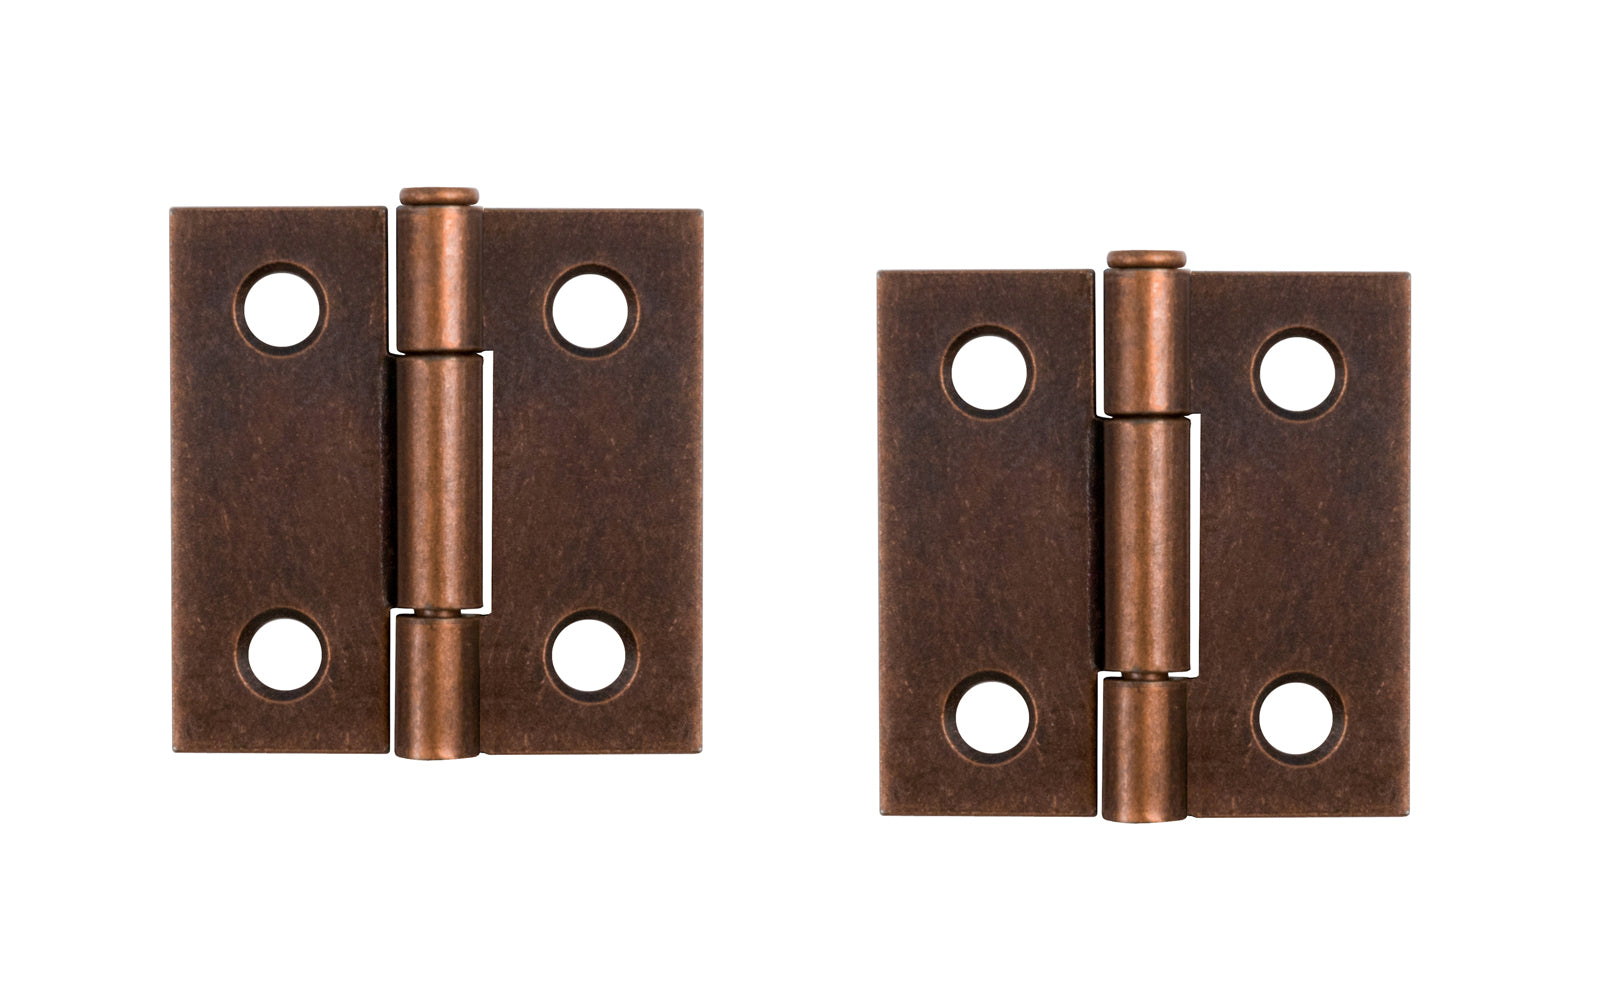 Traditional & classic plated steel butt cabinet hinges with loose pins. Removable hinge pins. 1-1/2" high x 1-1/2" wide. 1/16" leaf thickness gauge. Sold as a pair of hinges. Antique Copper Finish.